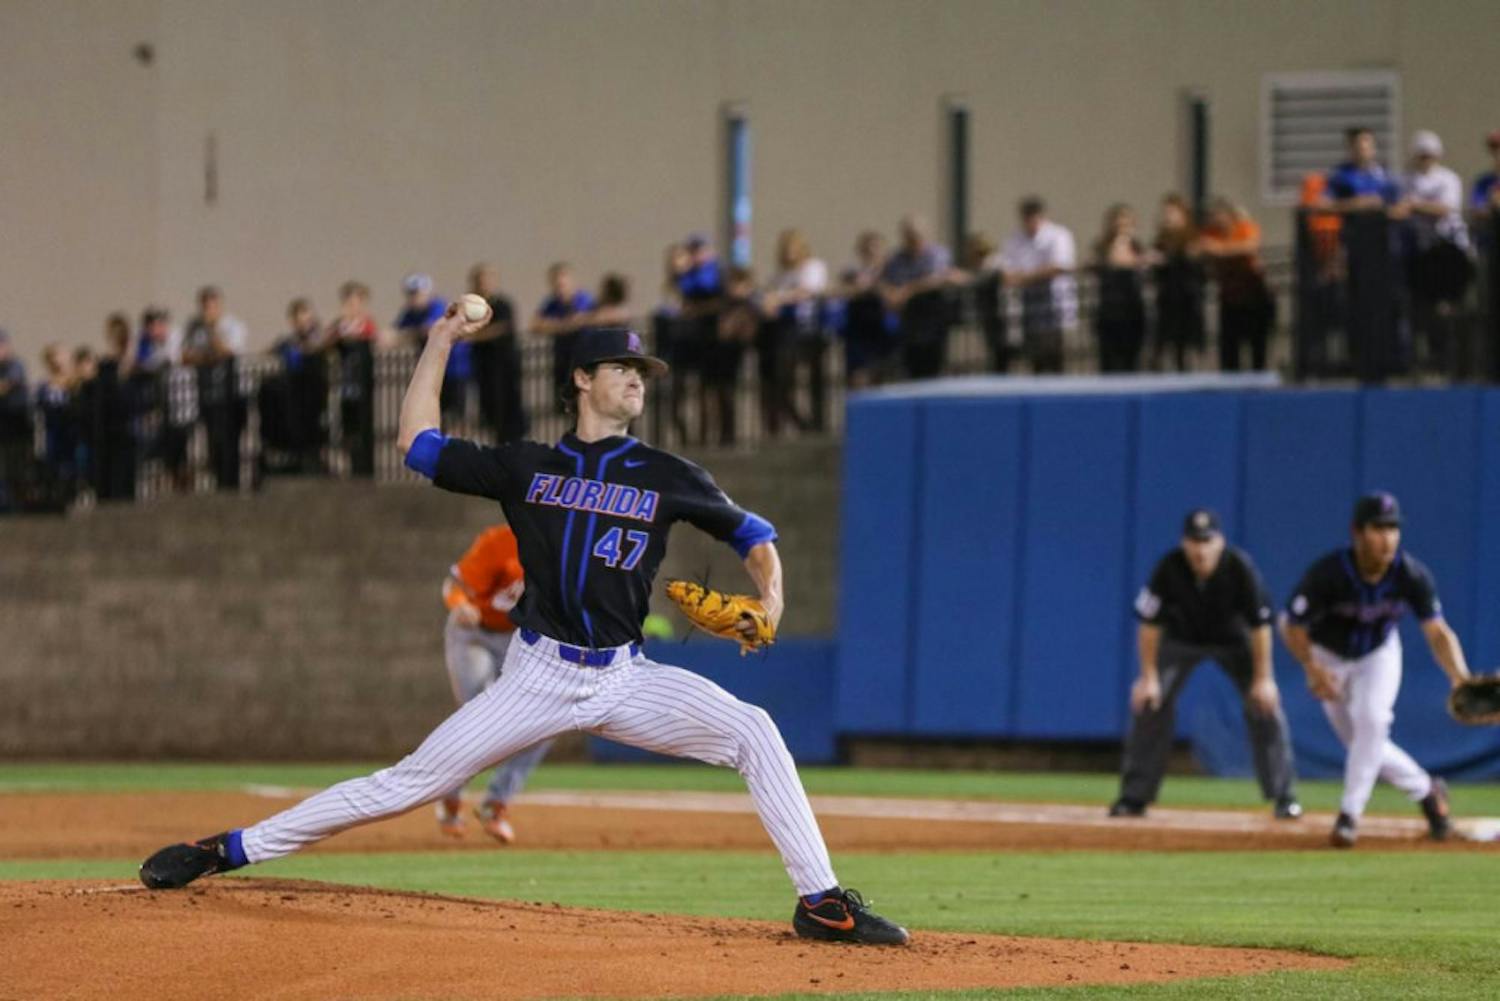 Junior Tommy Mace registered a 1.67 ERA in four appearances during an abridged 2020 campaign